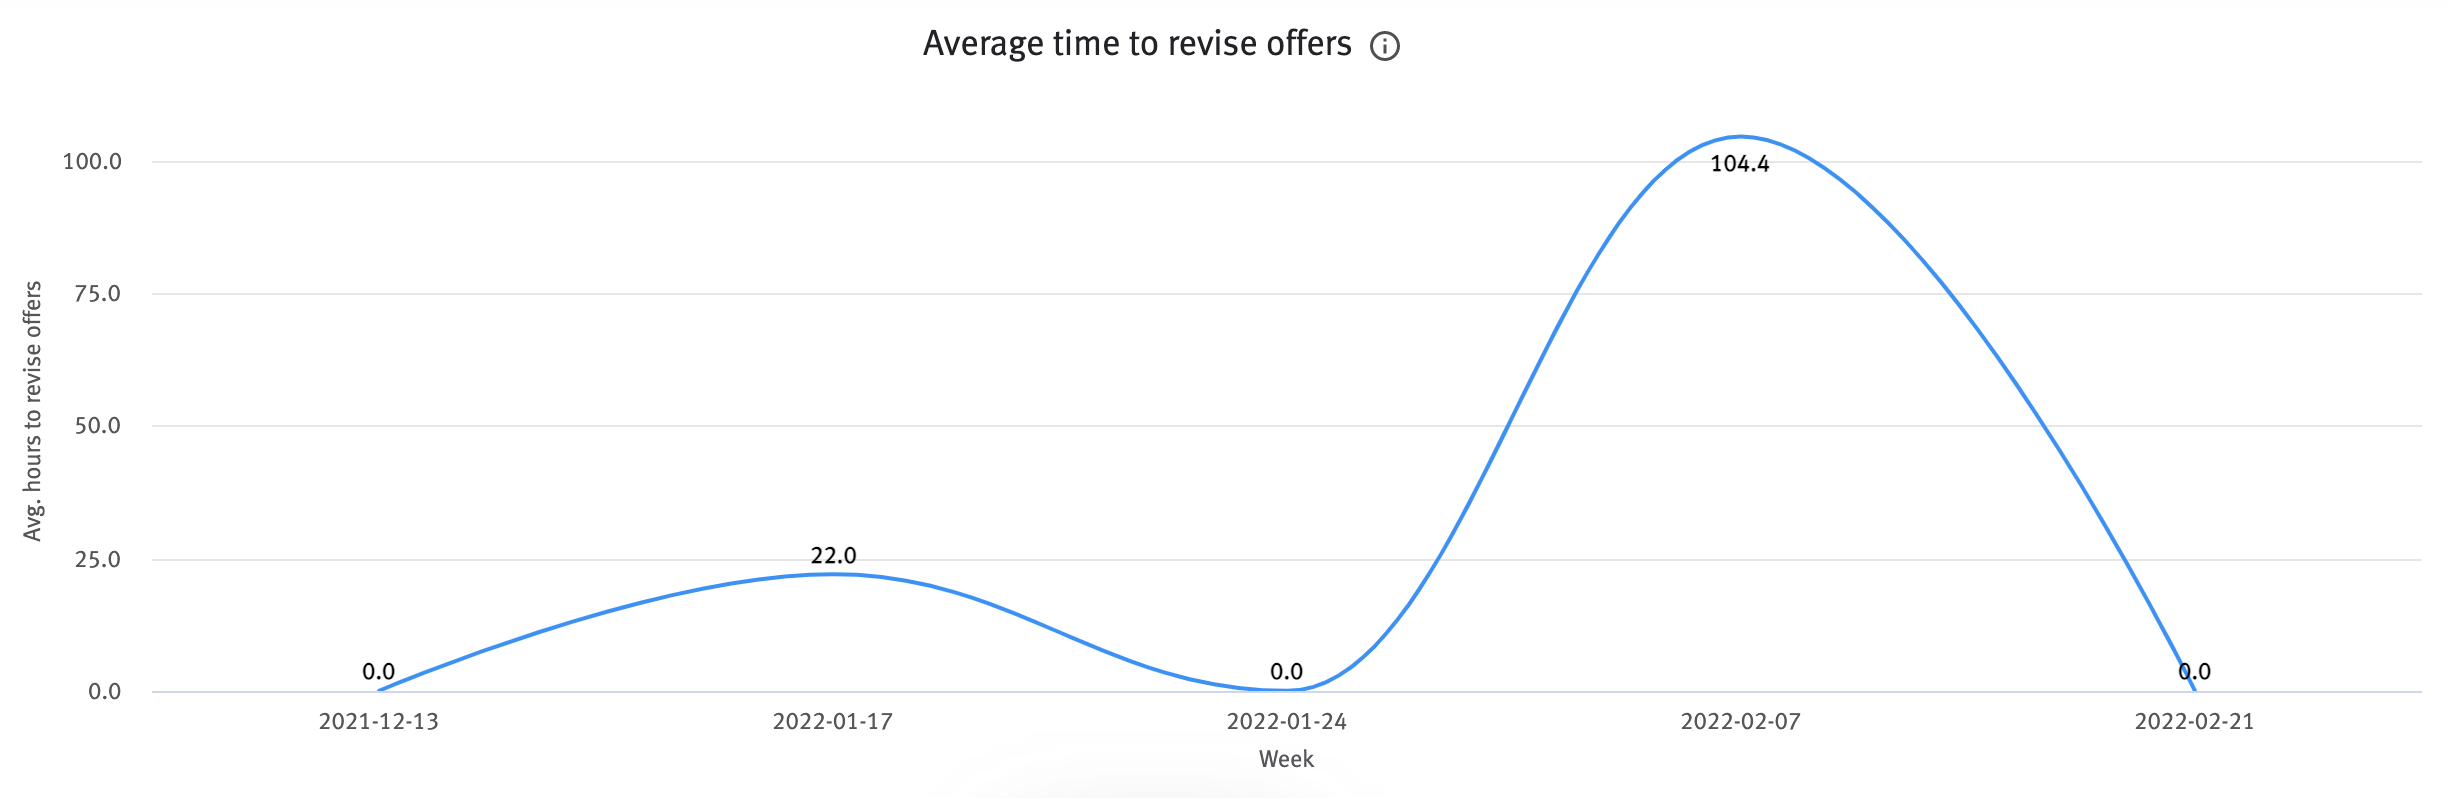 Average time to revise offers chart